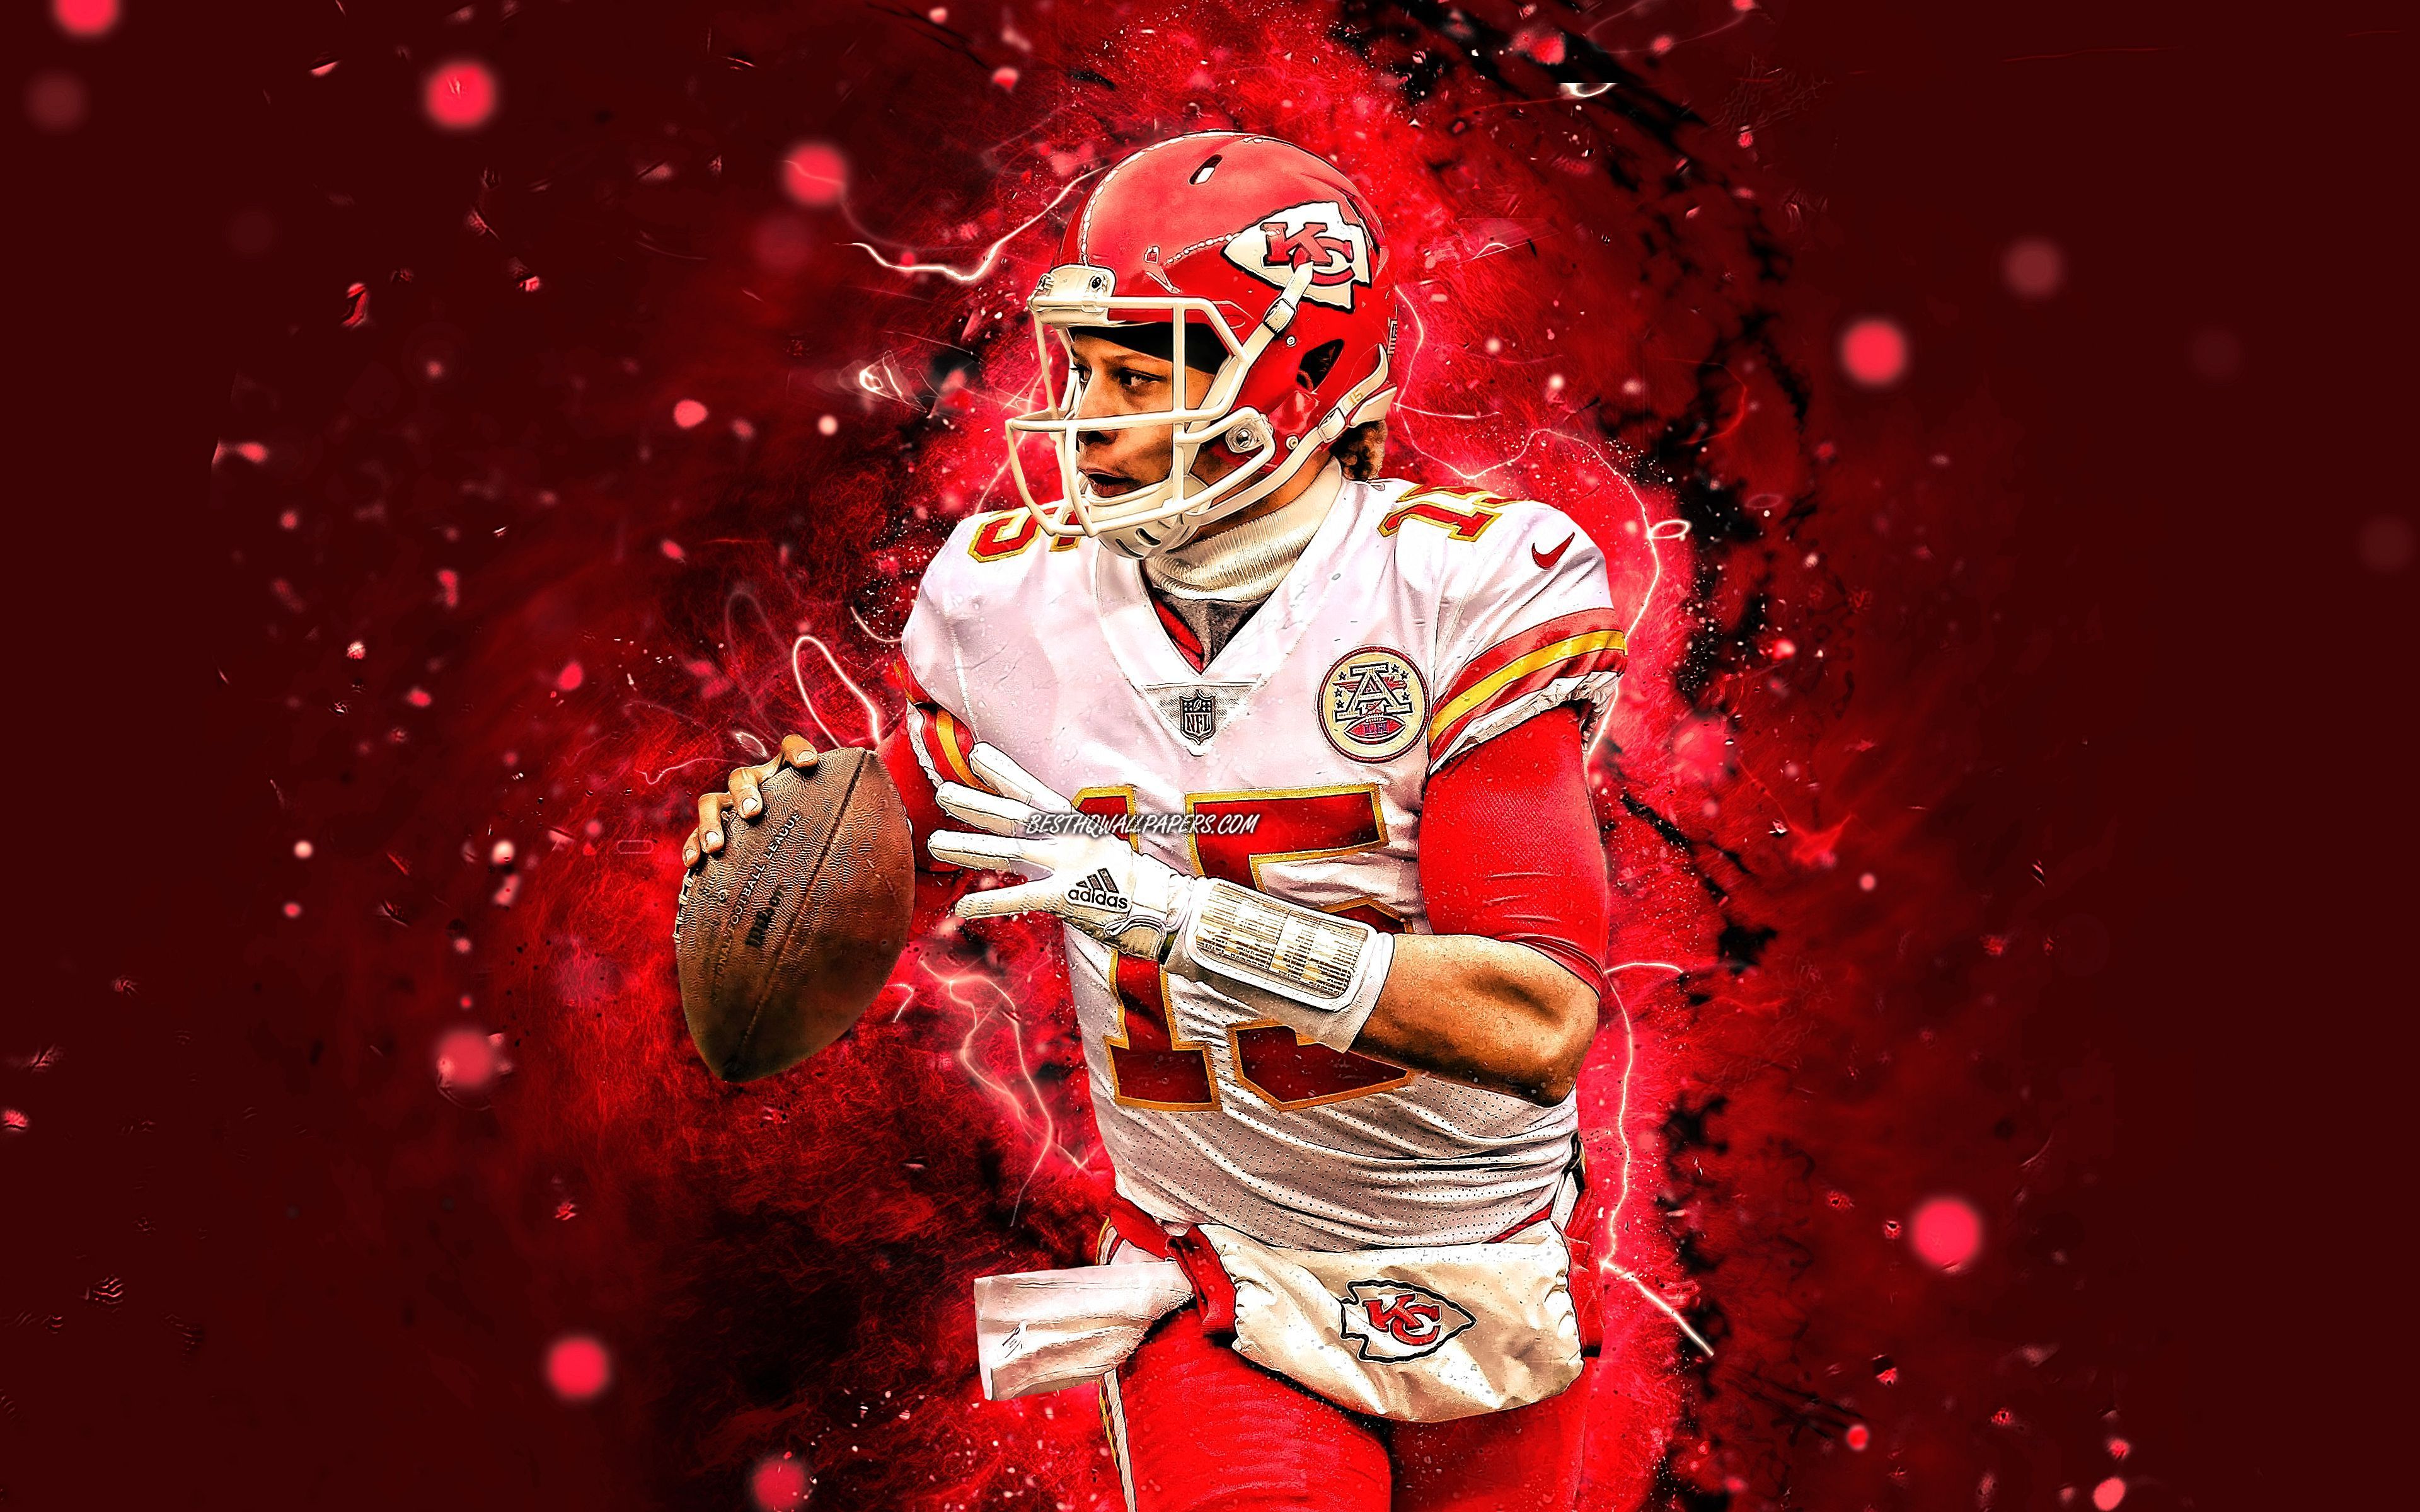 Update more than 60 chiefs wallpaper patrick mahomes - in.cdgdbentre